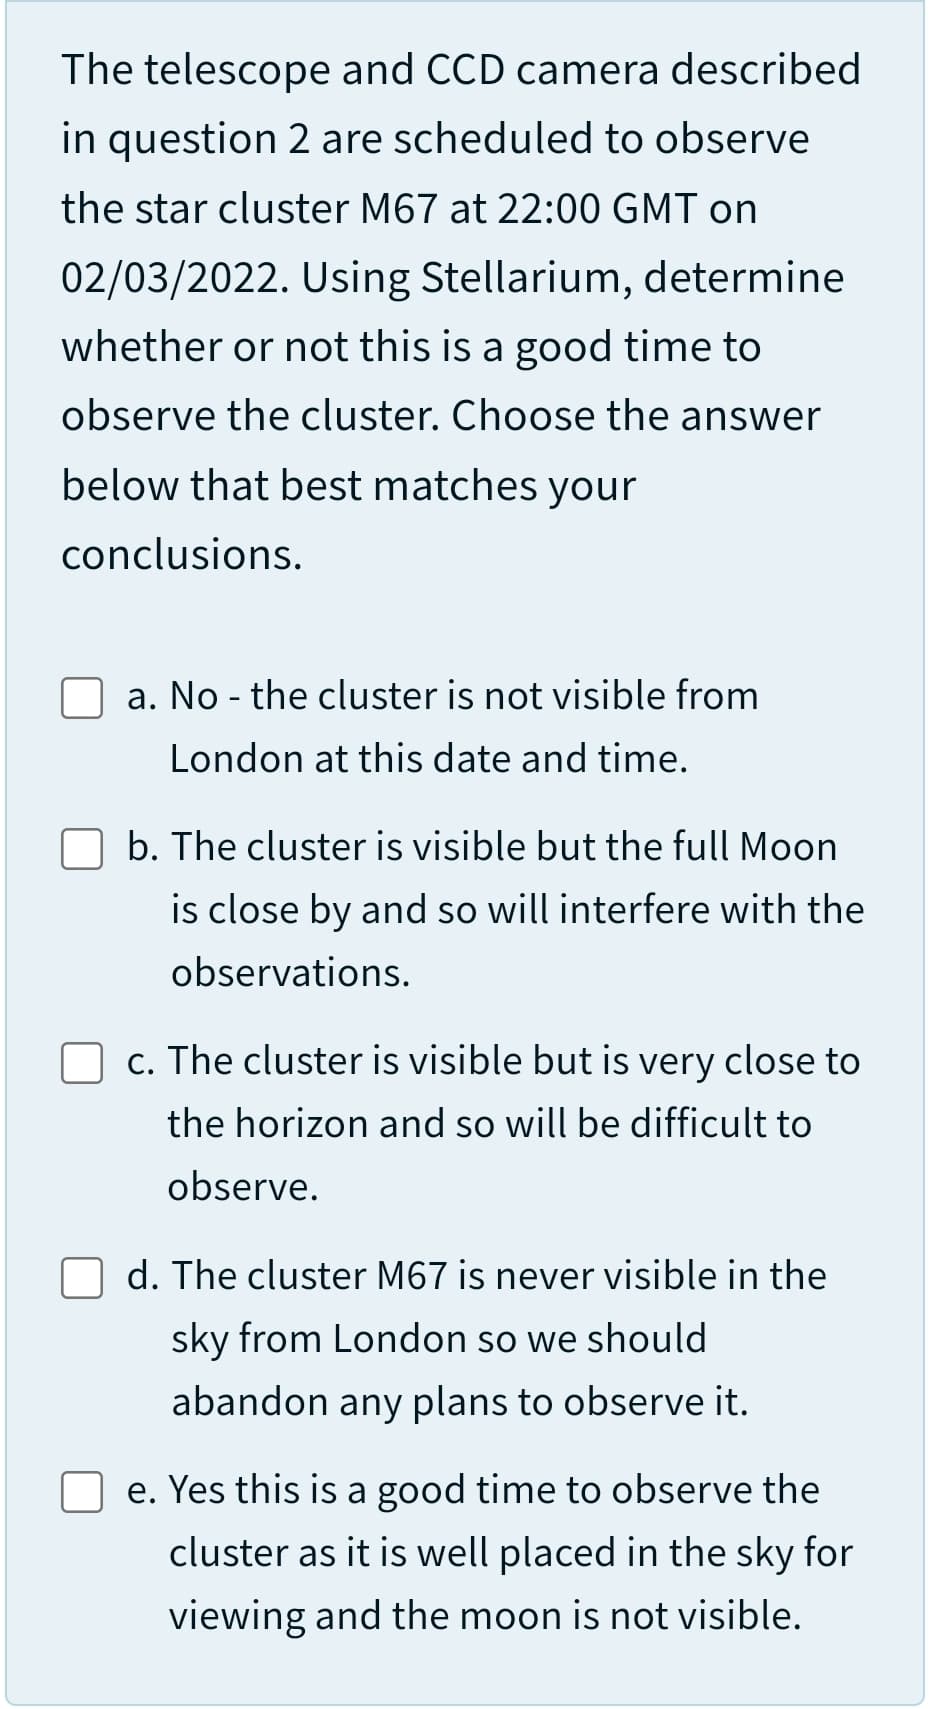 The telescope and CCD camera described
in question 2 are scheduled to observe
the star cluster M67 at 22:00 GMT on
02/03/2022. Using Stellarium, determine
whether or not this is a good time to
observe the cluster. Choose the answer
below that best matches your
conclusions.
a. No - the cluster is not visible from
London at this date and time.
b. The cluster is visible but the full Moon
is close by and so will interfere with the
observations.
c. The cluster is visible but is very close to
the horizon and so will be difficult to
observe.
d. The cluster M67 is never visible in the
sky from London so we should
abandon any plans to observe it.
e. Yes this is a good time to observe the
cluster as it is well placed in the sky for
viewing and the moon is not visible.
